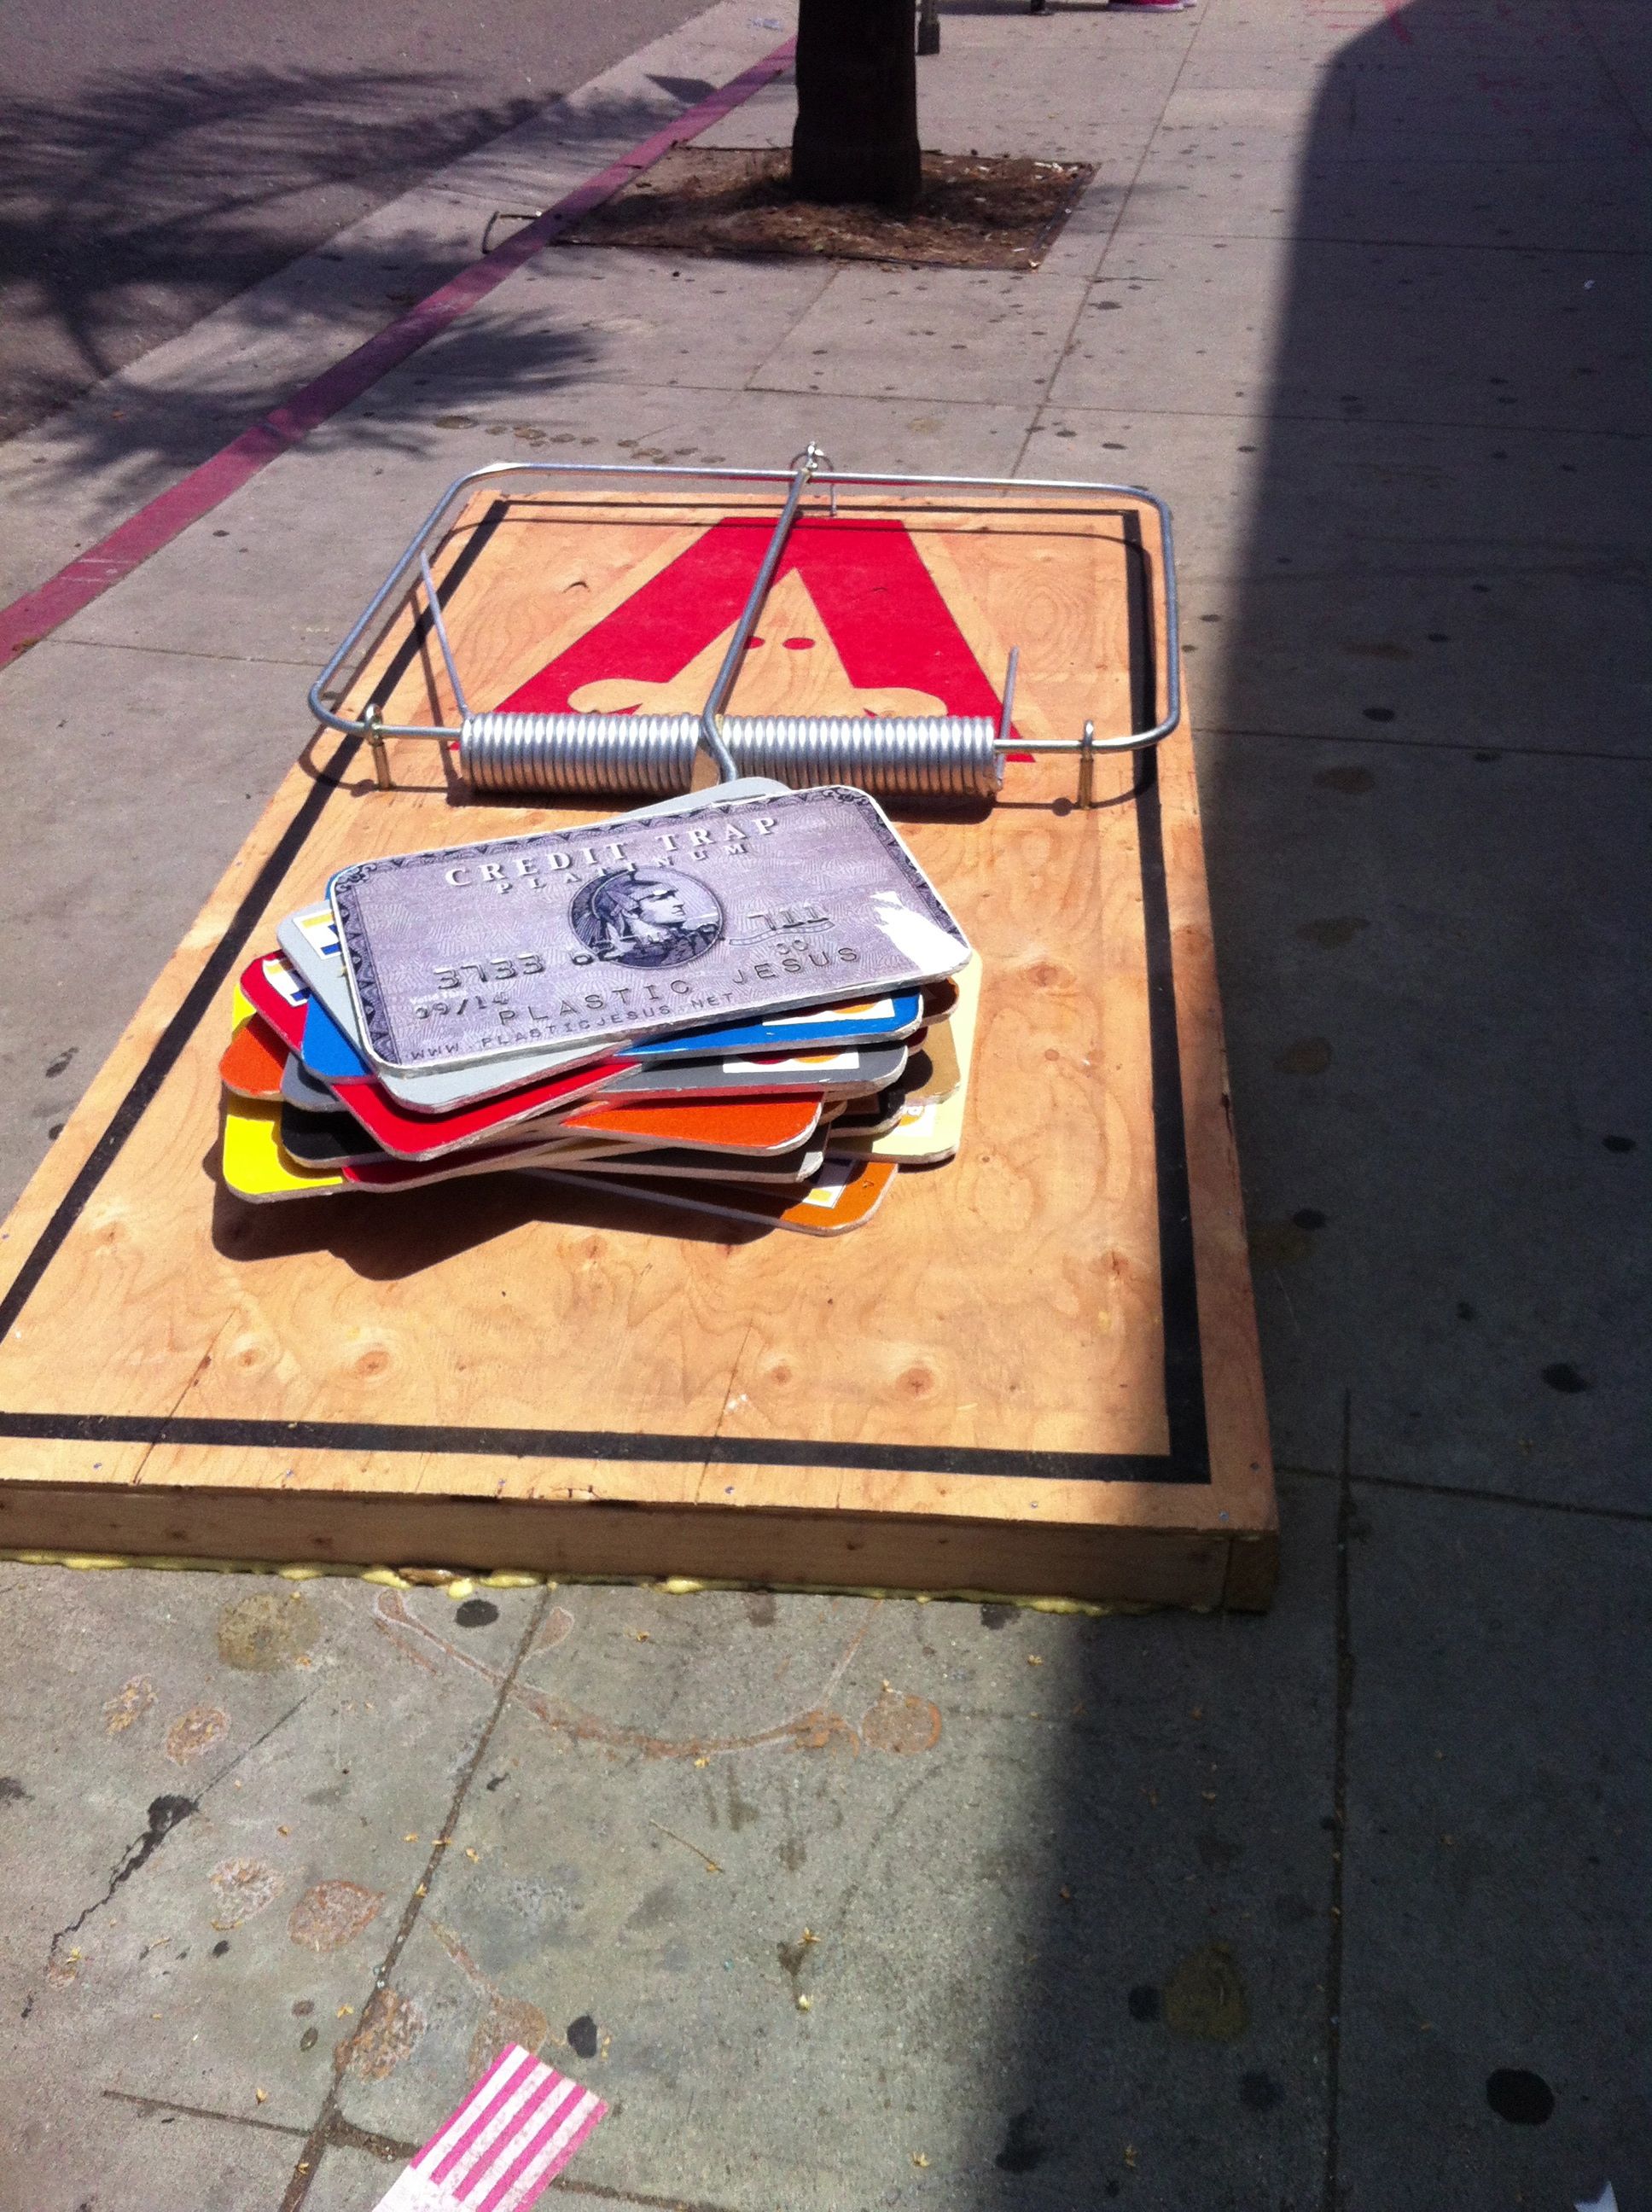 Plastic Jesus mouse trap American Express street art on Melrose Ave ...